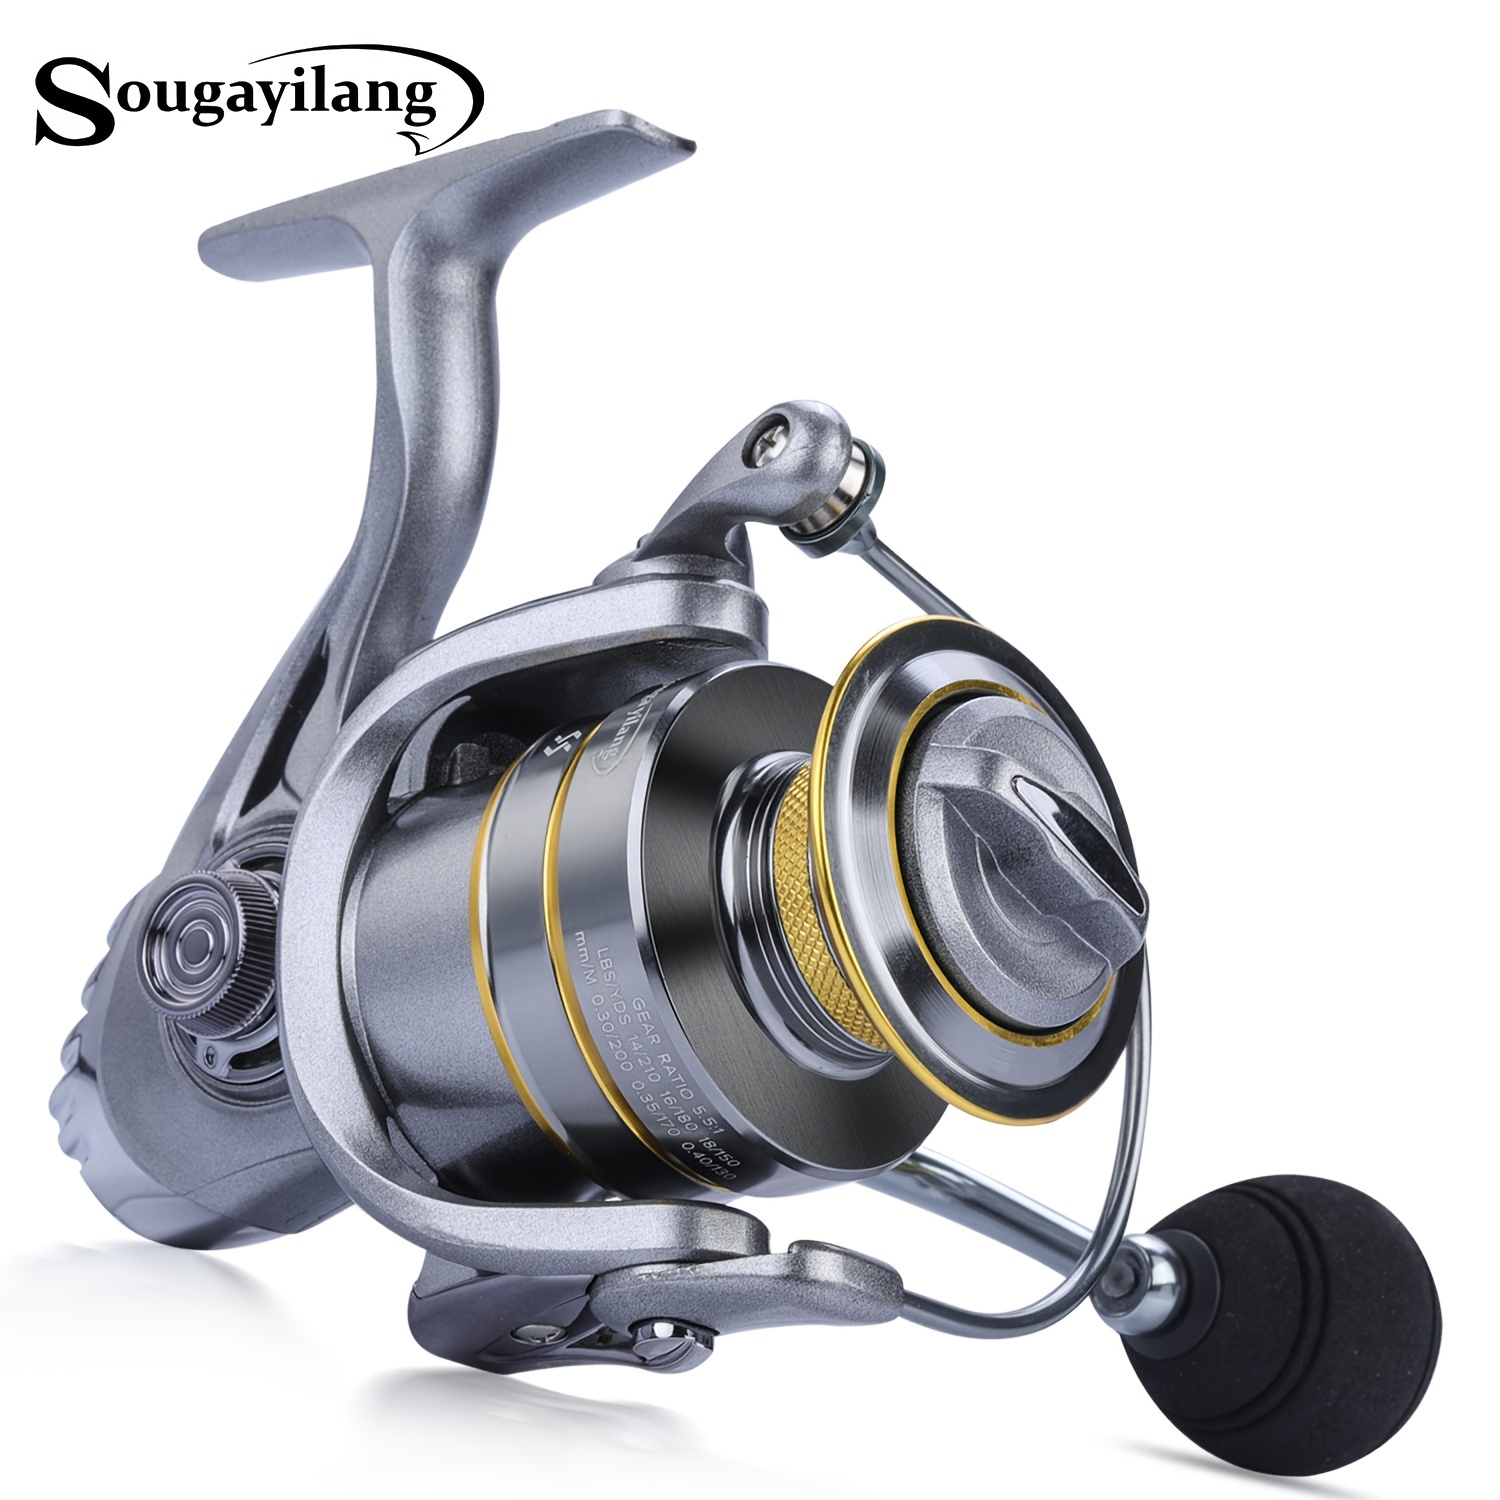 Sougayilang Spinning Fishing Reel - 13+1 BB, High Speed Gear Ratio, EVA  Handle - Ideal for Bass, Trout, and Freshwater Fishing